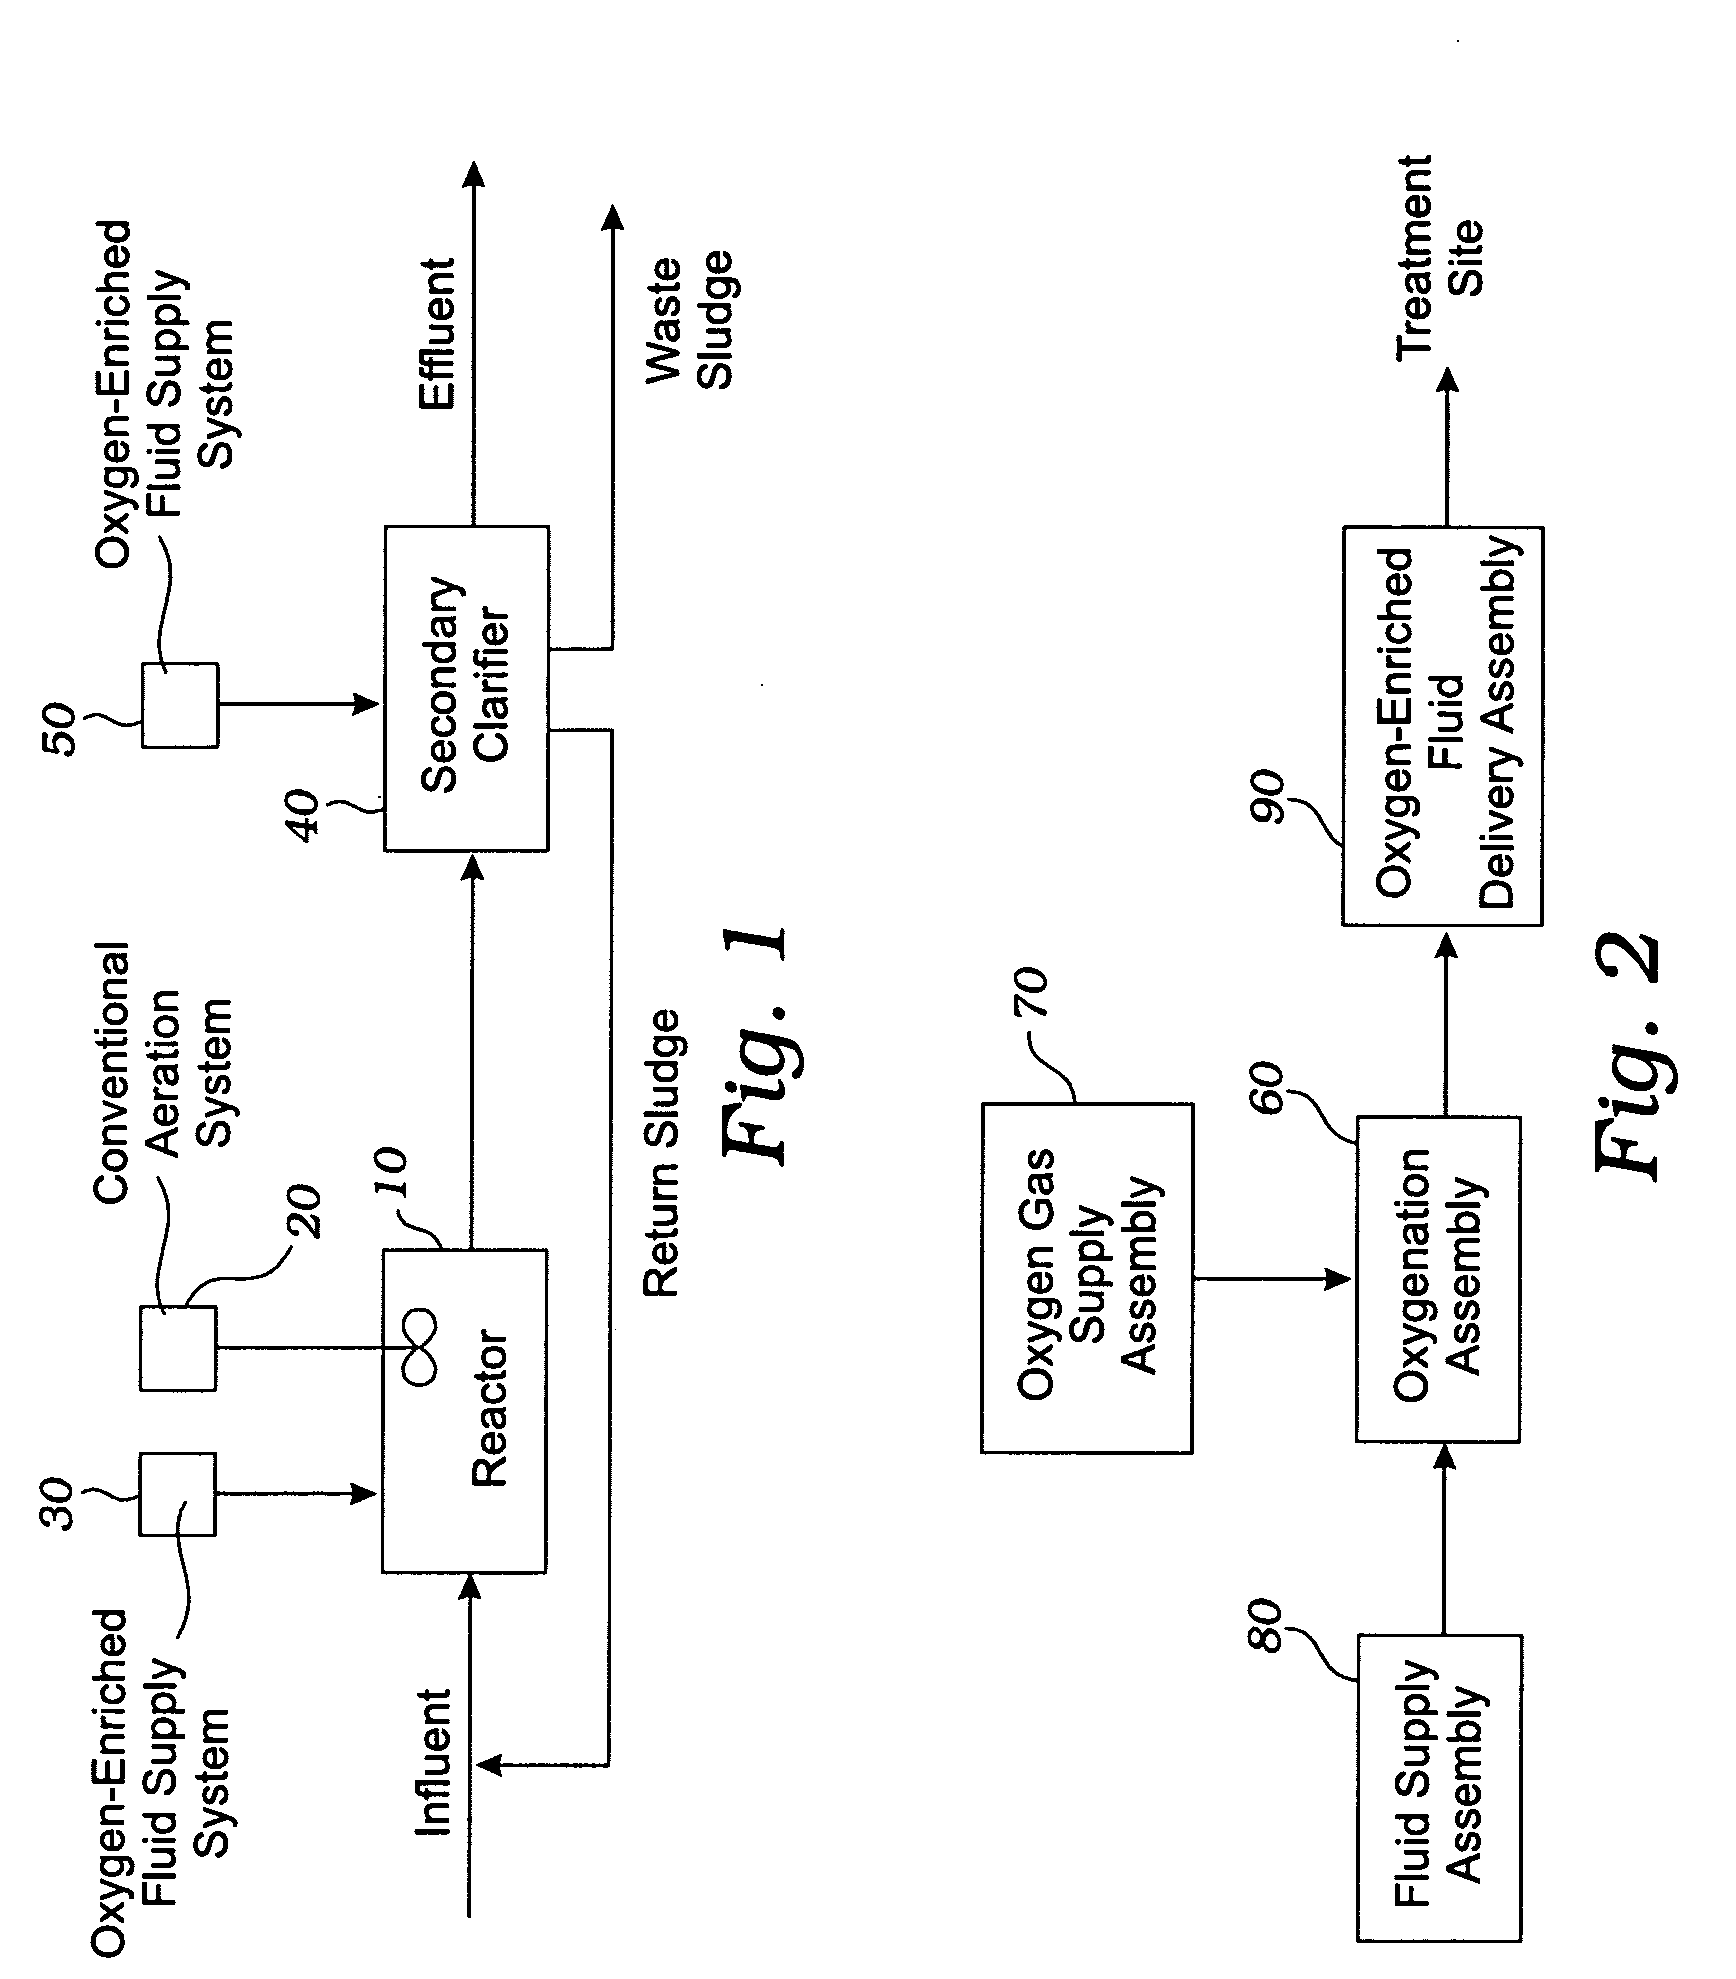 Method for oxygenating wastewater